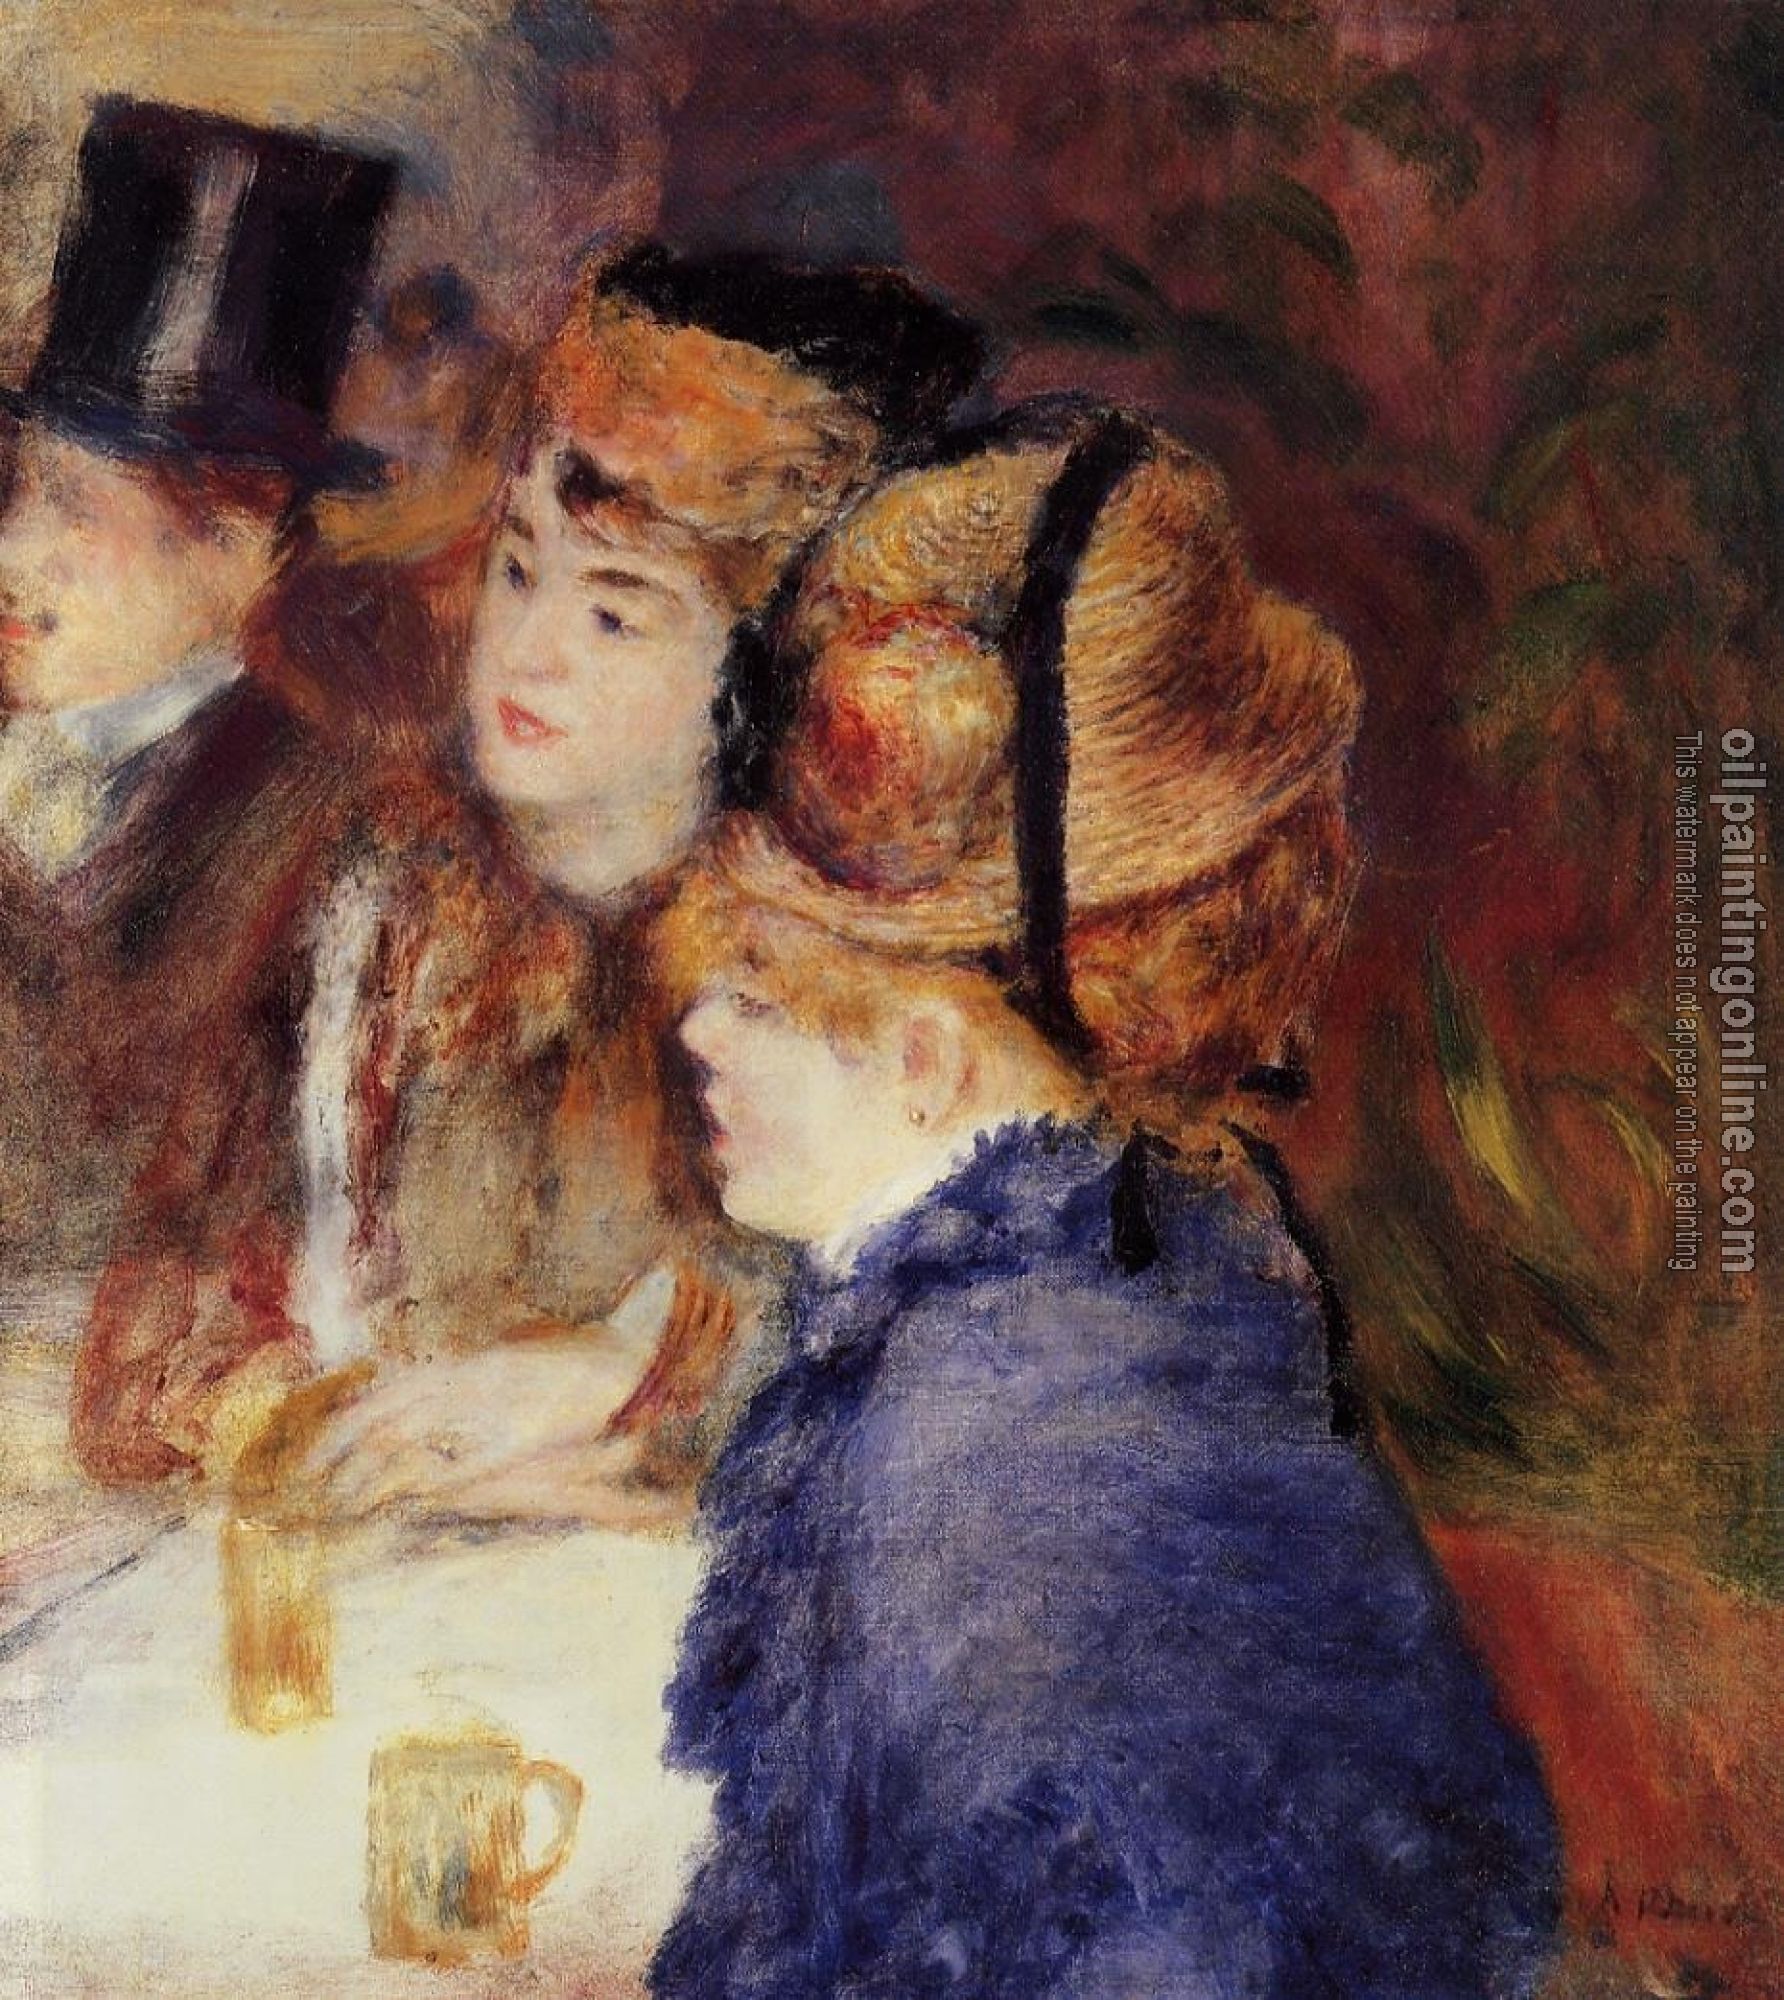 Renoir, Pierre Auguste - At the Cafe